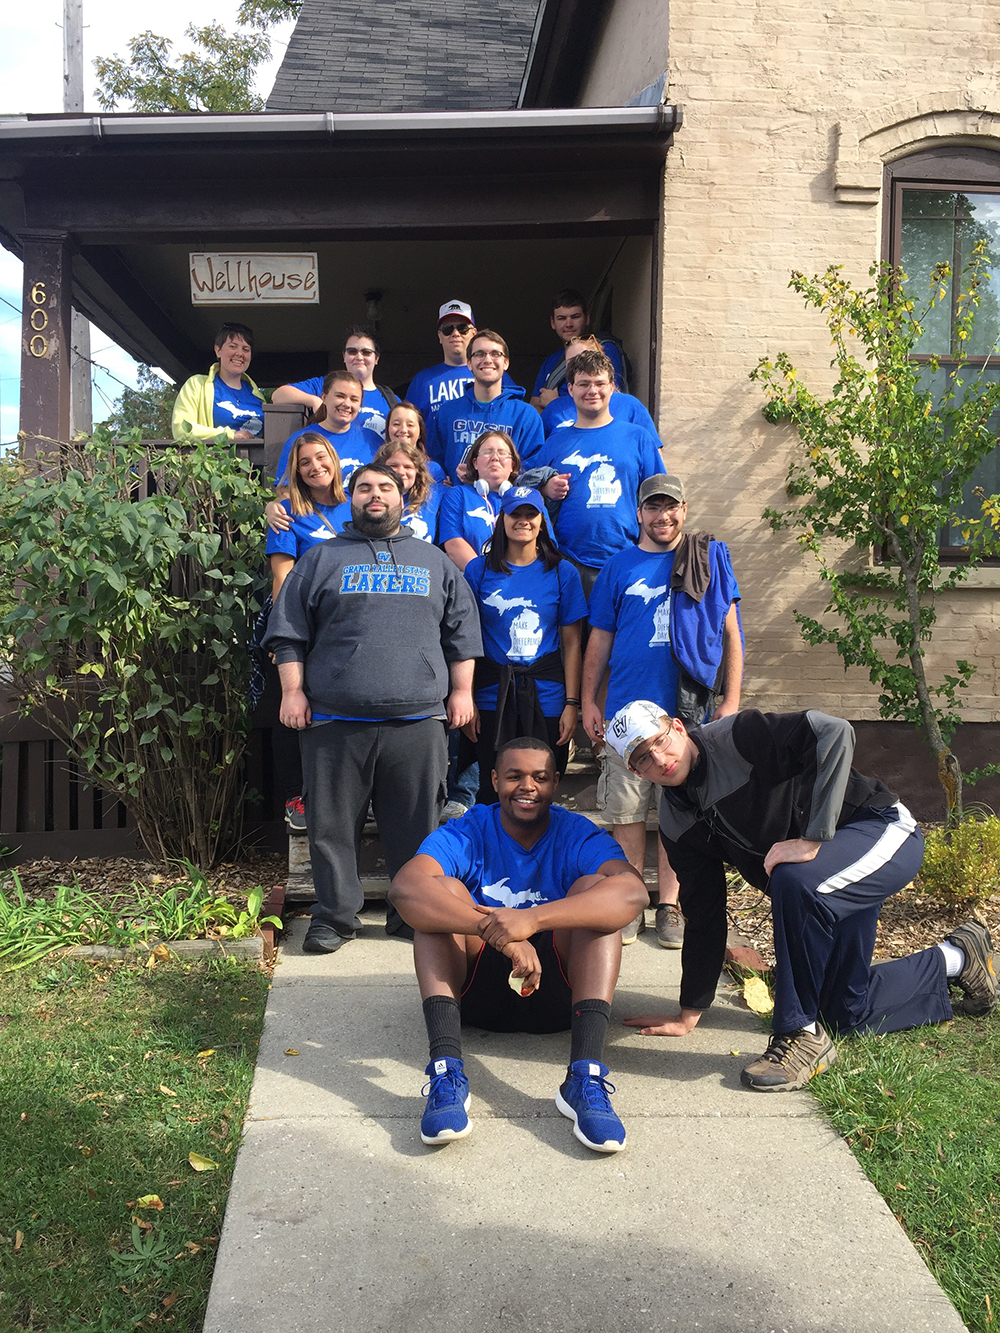 group in blue GVSU Make a Difference Day t-shirts standing on porch and stairs in front of house with Wellhouse sign and number 600 on post